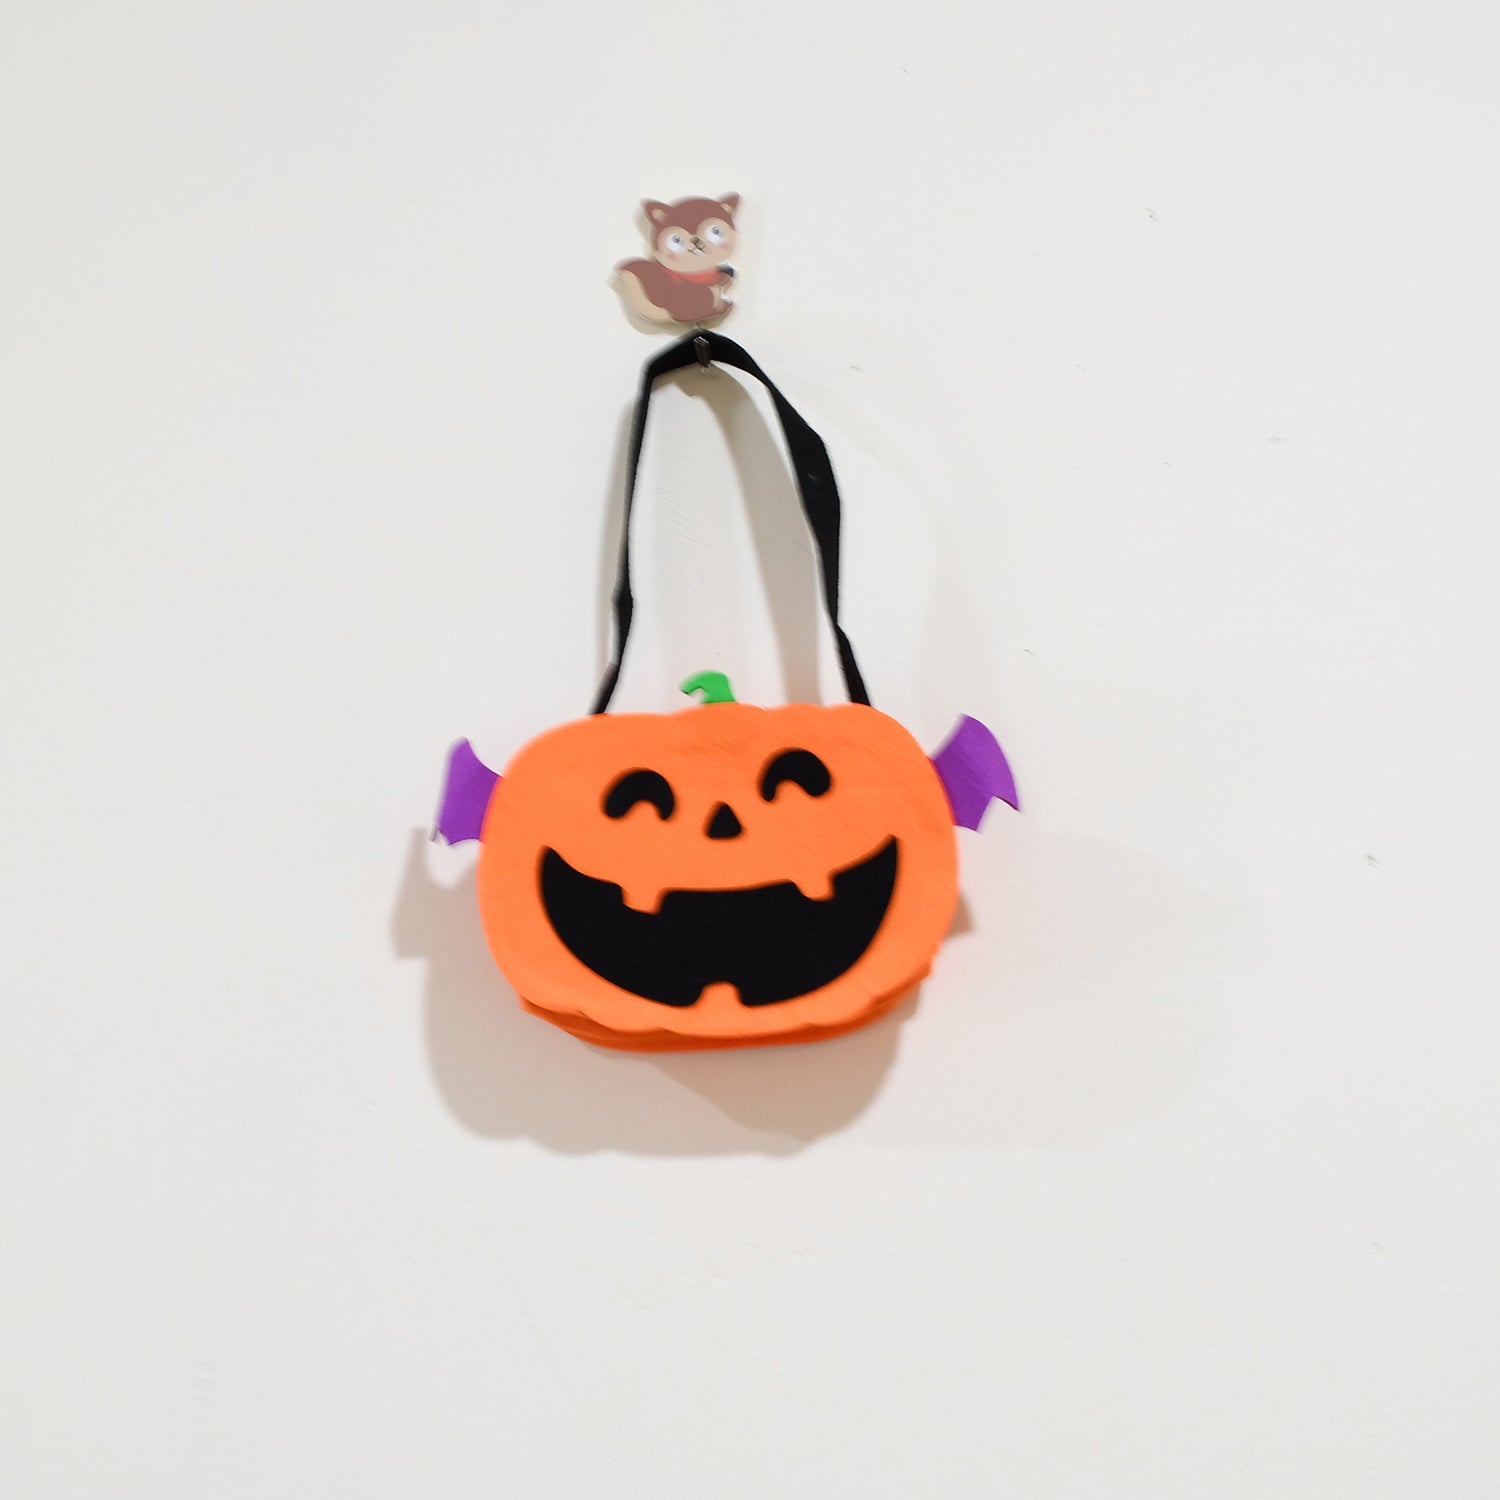 6929 Halloween Pumpkin Bags Non- Woven Candy Bags Trick or Treat Bags Portable Tote Bag Cartoon Goodie Handbag for Halloween Party Favors, Kids Gift Bag